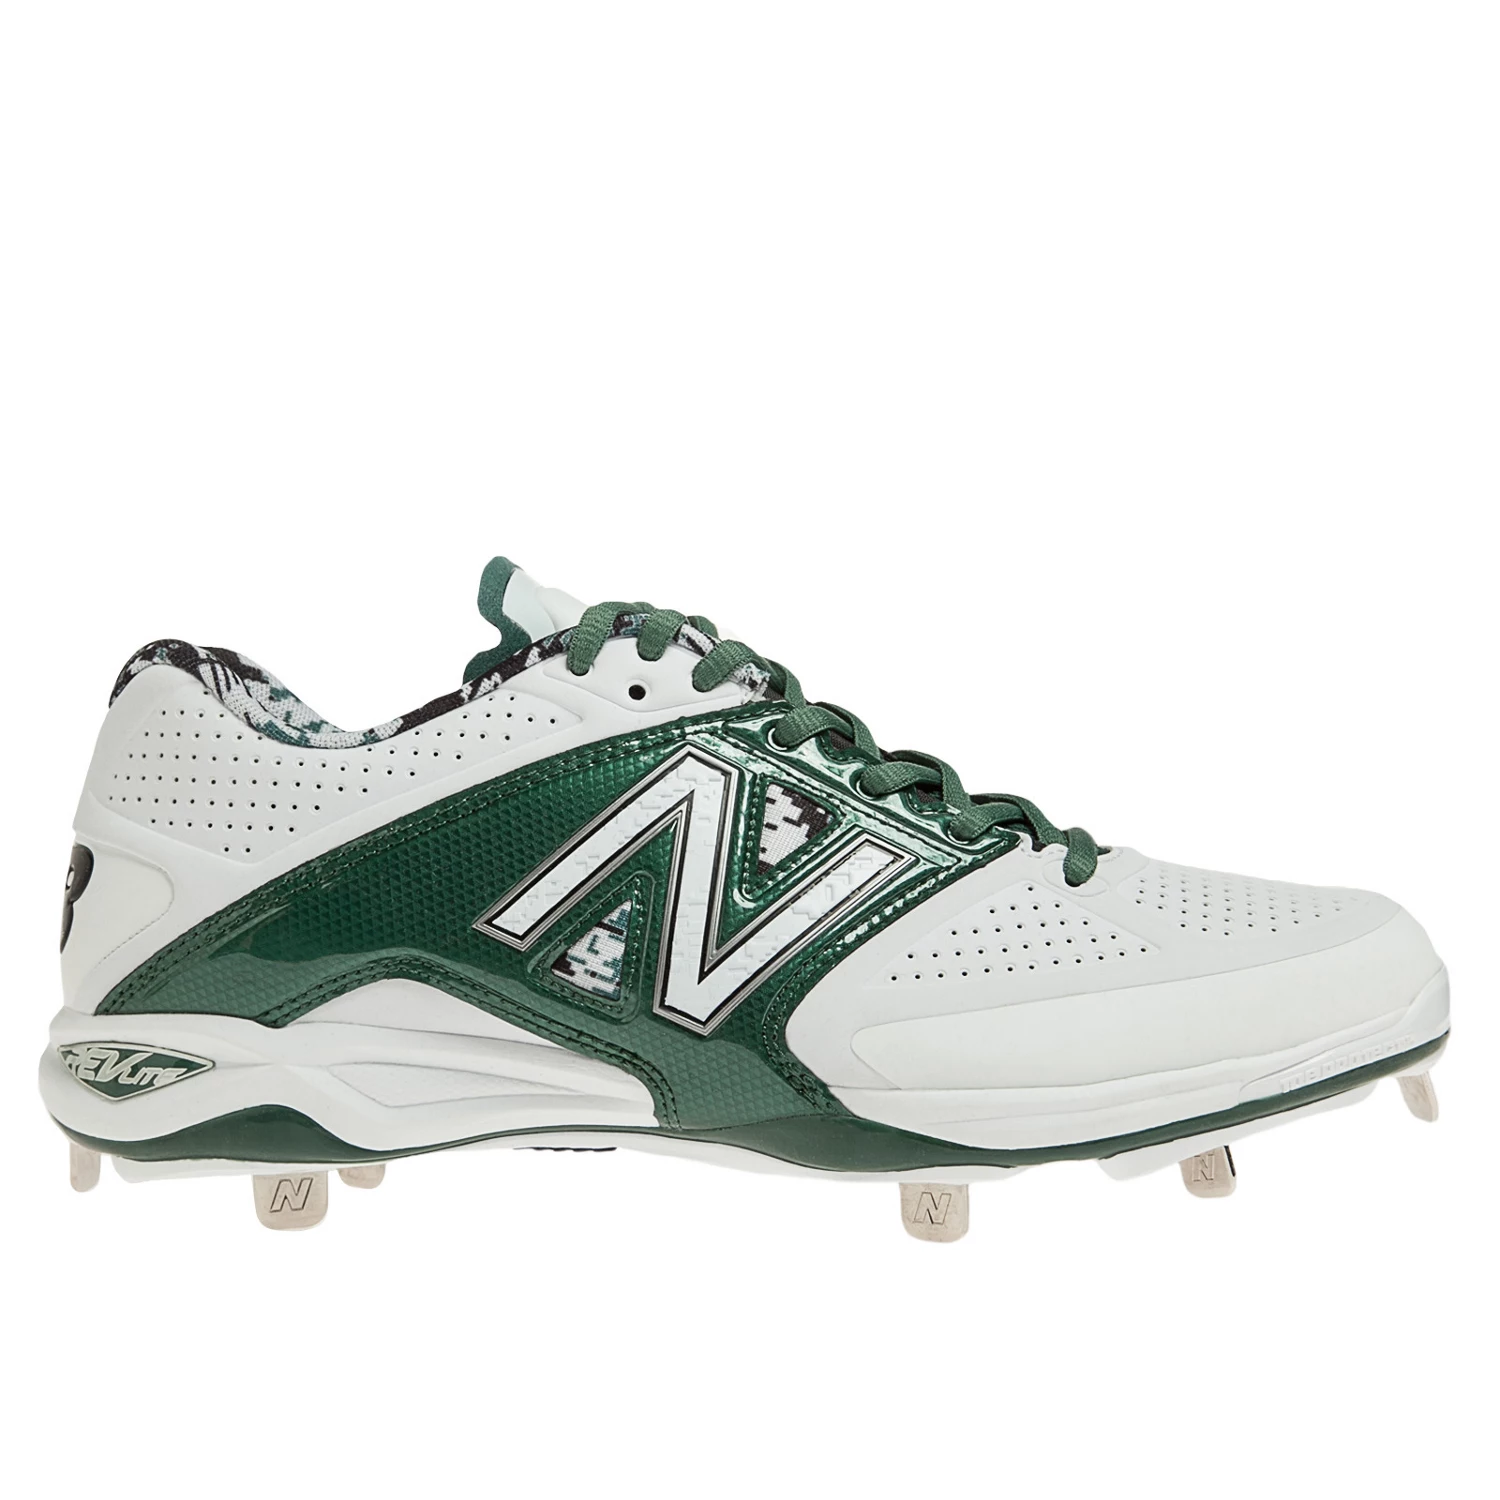 green and white new balance cleats